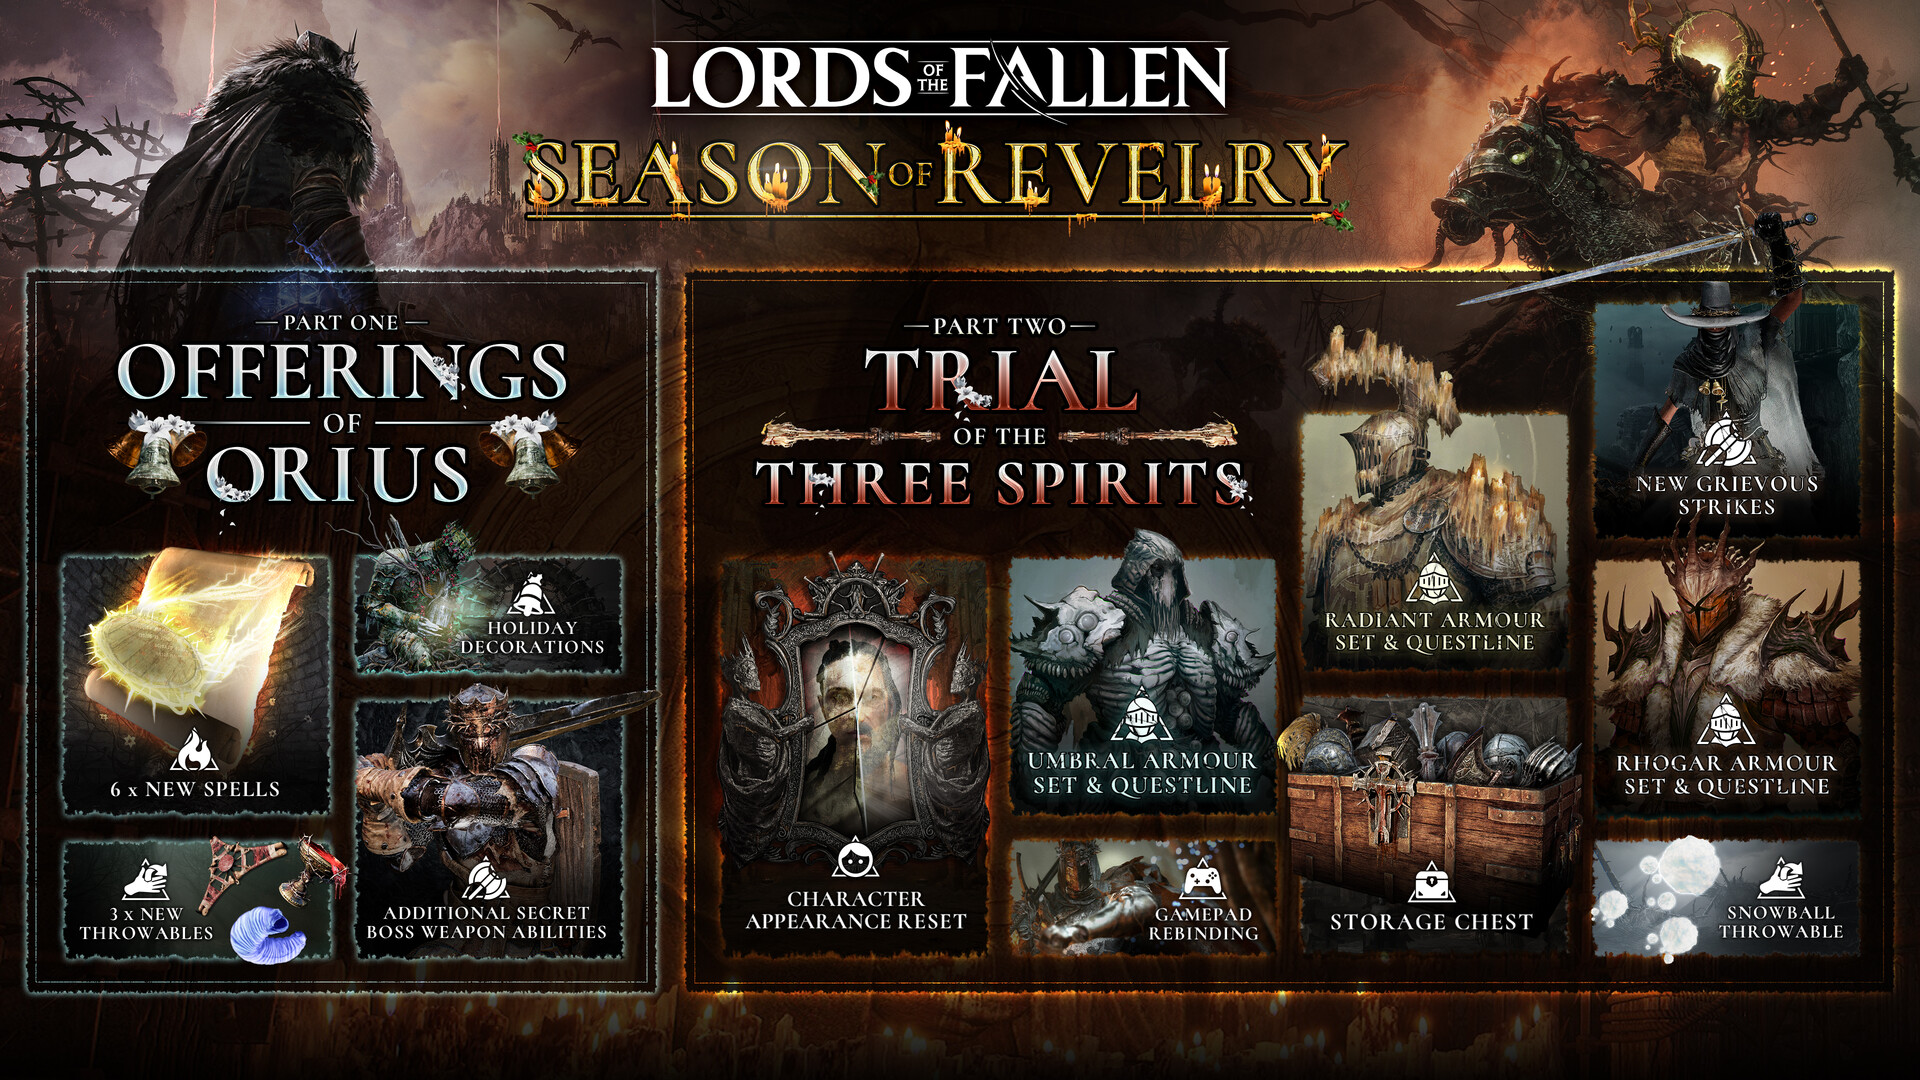 Lords Mobile - Special 2-Day Only Sale! Event Duration